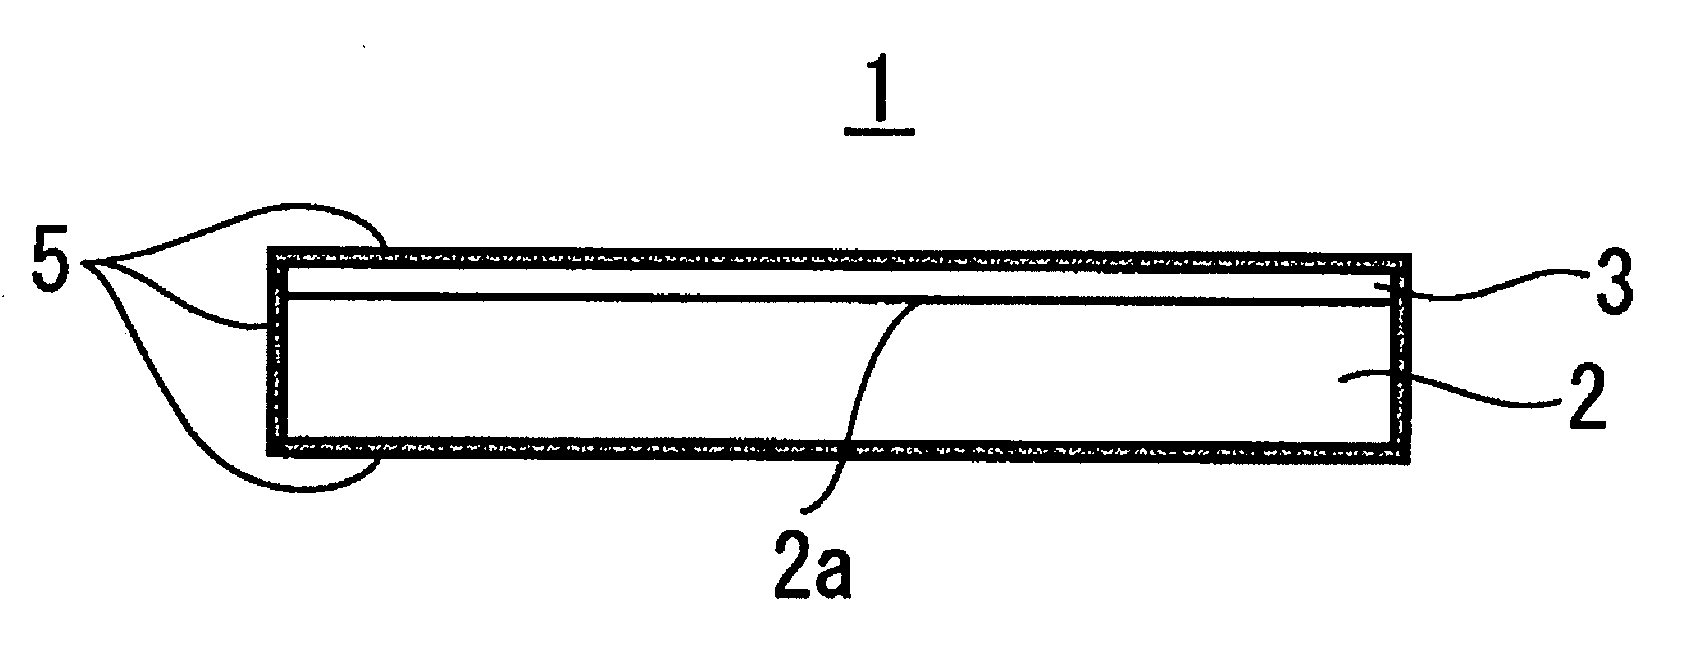 Porous multilayer filter and method for producing same